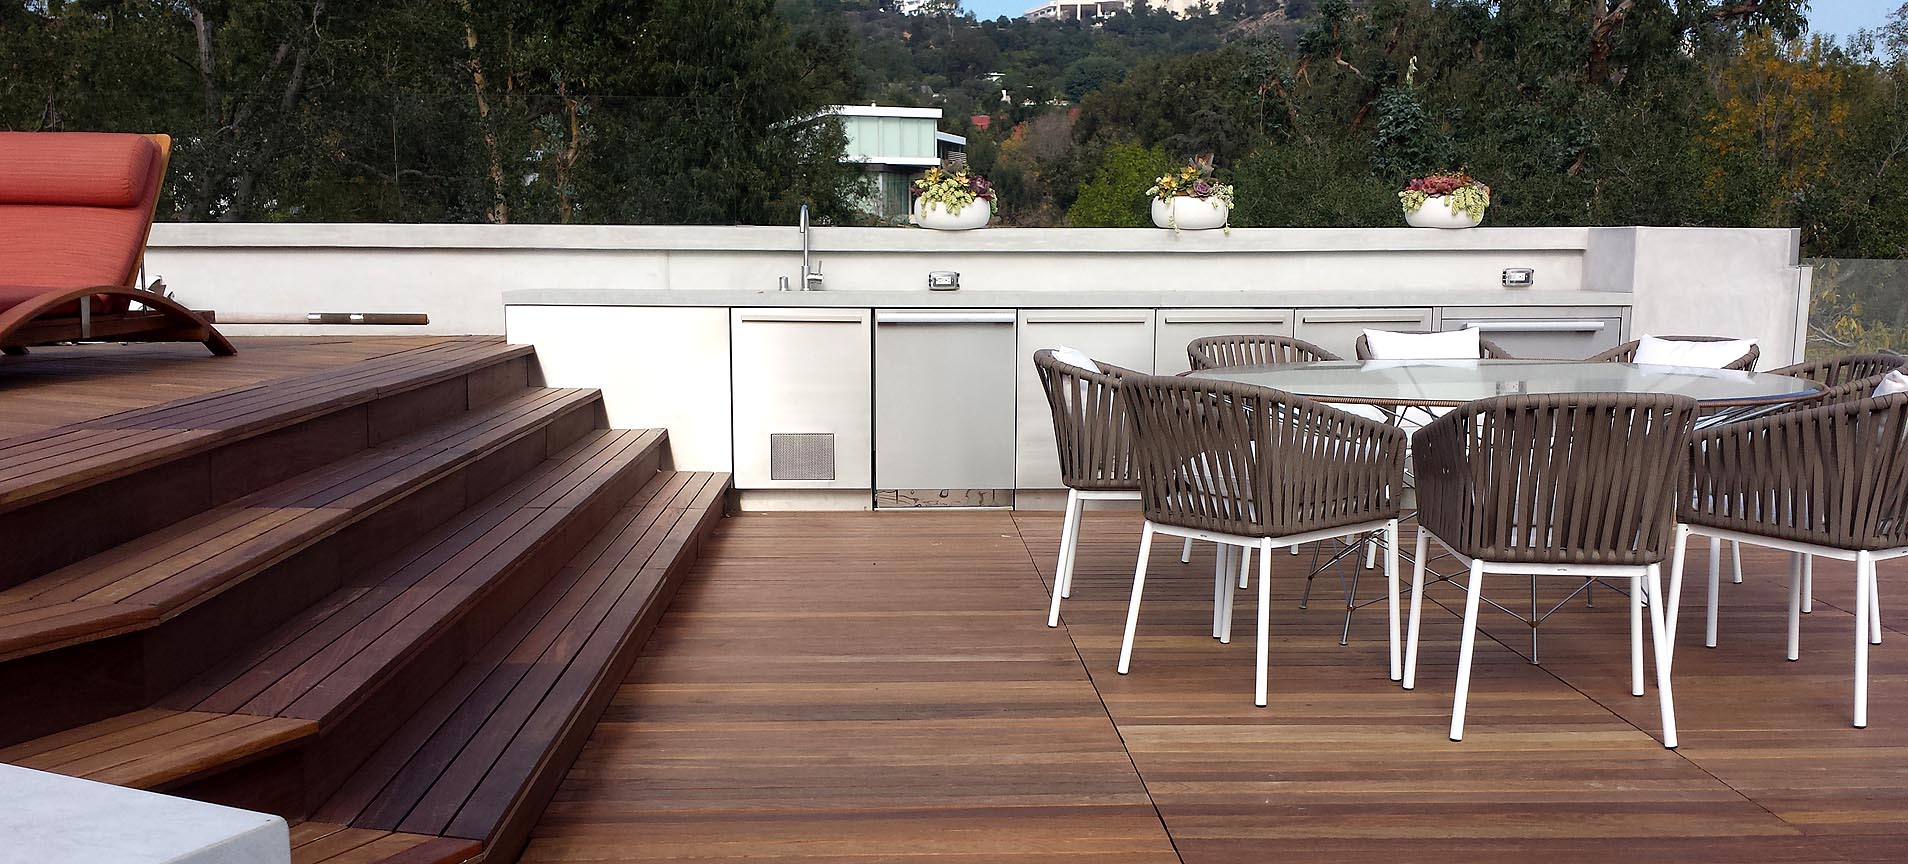 Raised Deck vs Freestanding Deck: Which One Suits You Best?